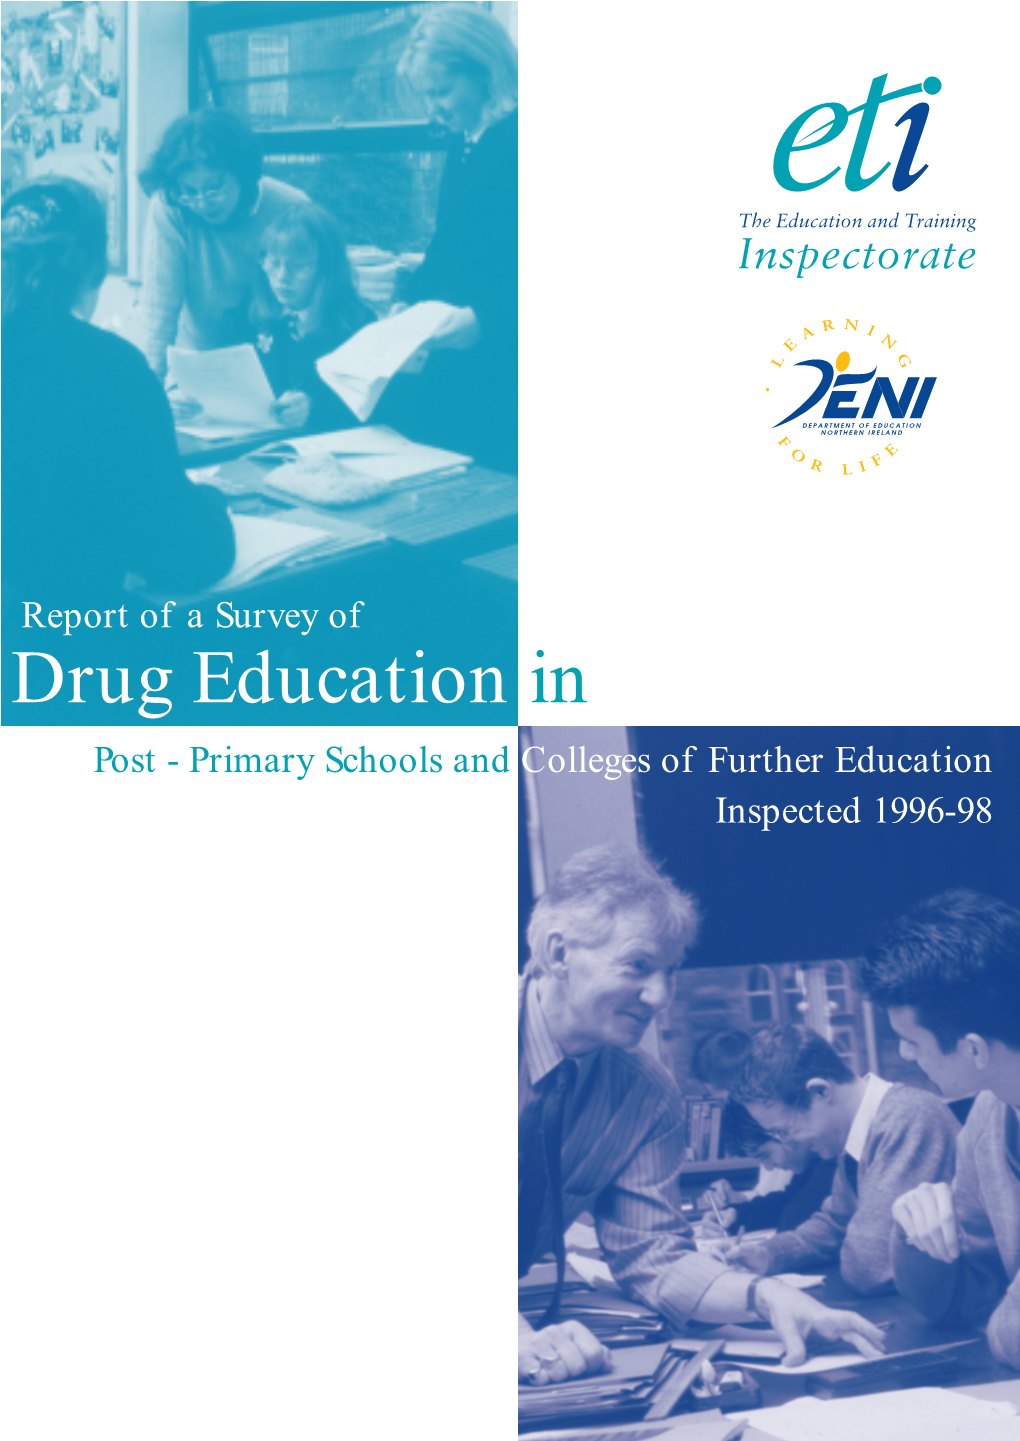 Post - Primary Schools and Colleges of Further Education Inspected 1996-98 Drug Education In